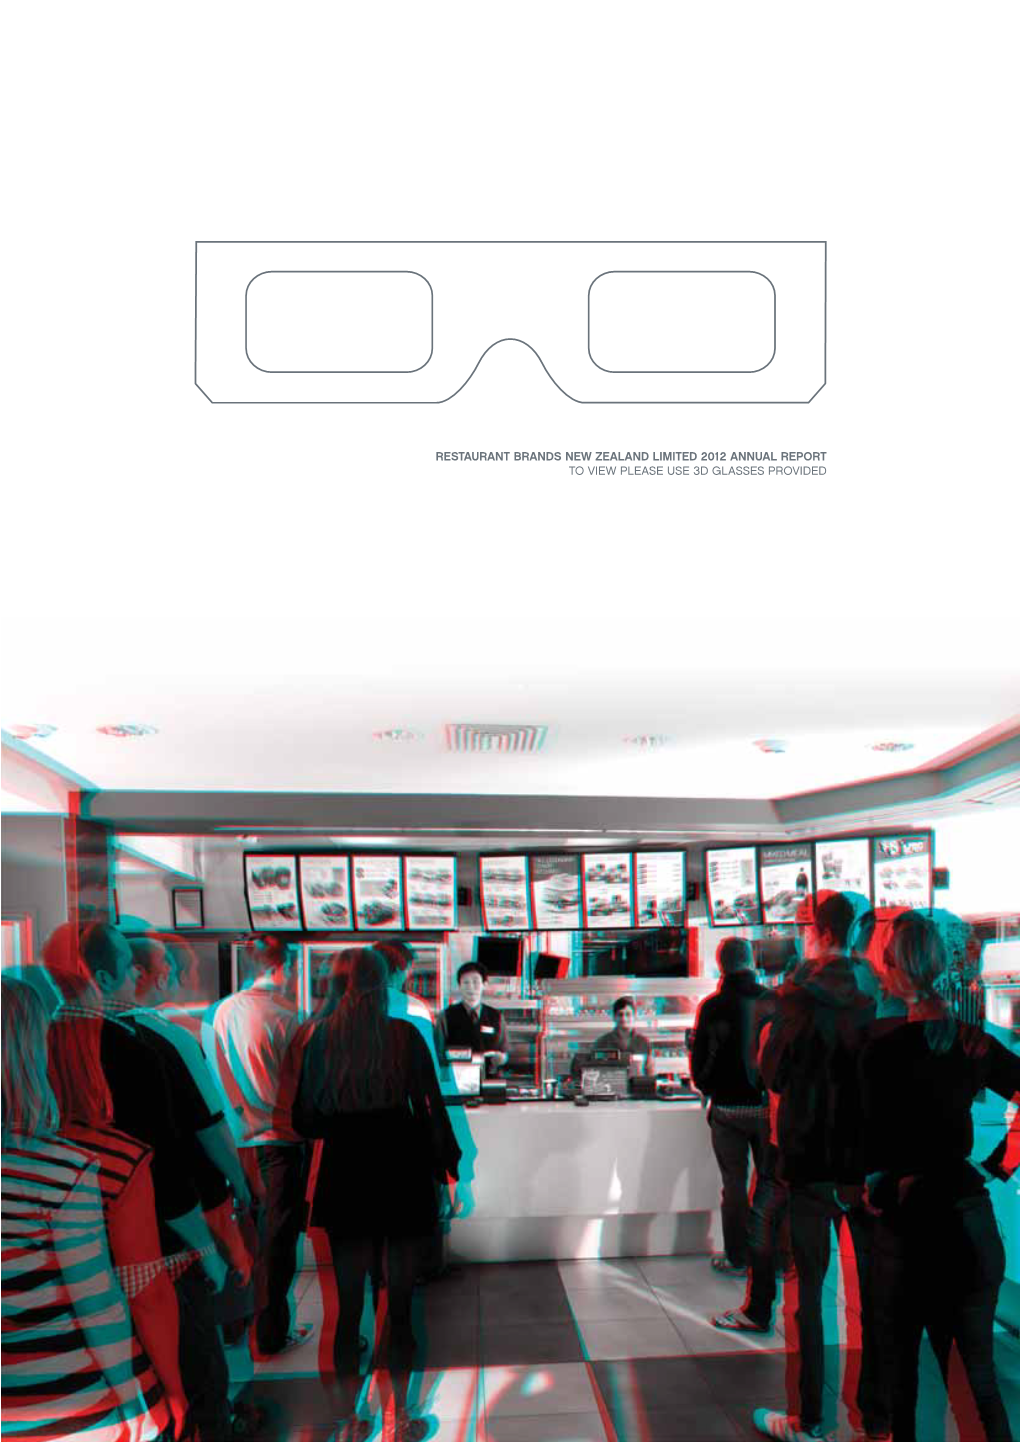 ANNUAL REPORT to VIEW PLEASE USE 3D GLASSES PROVIDED Contents